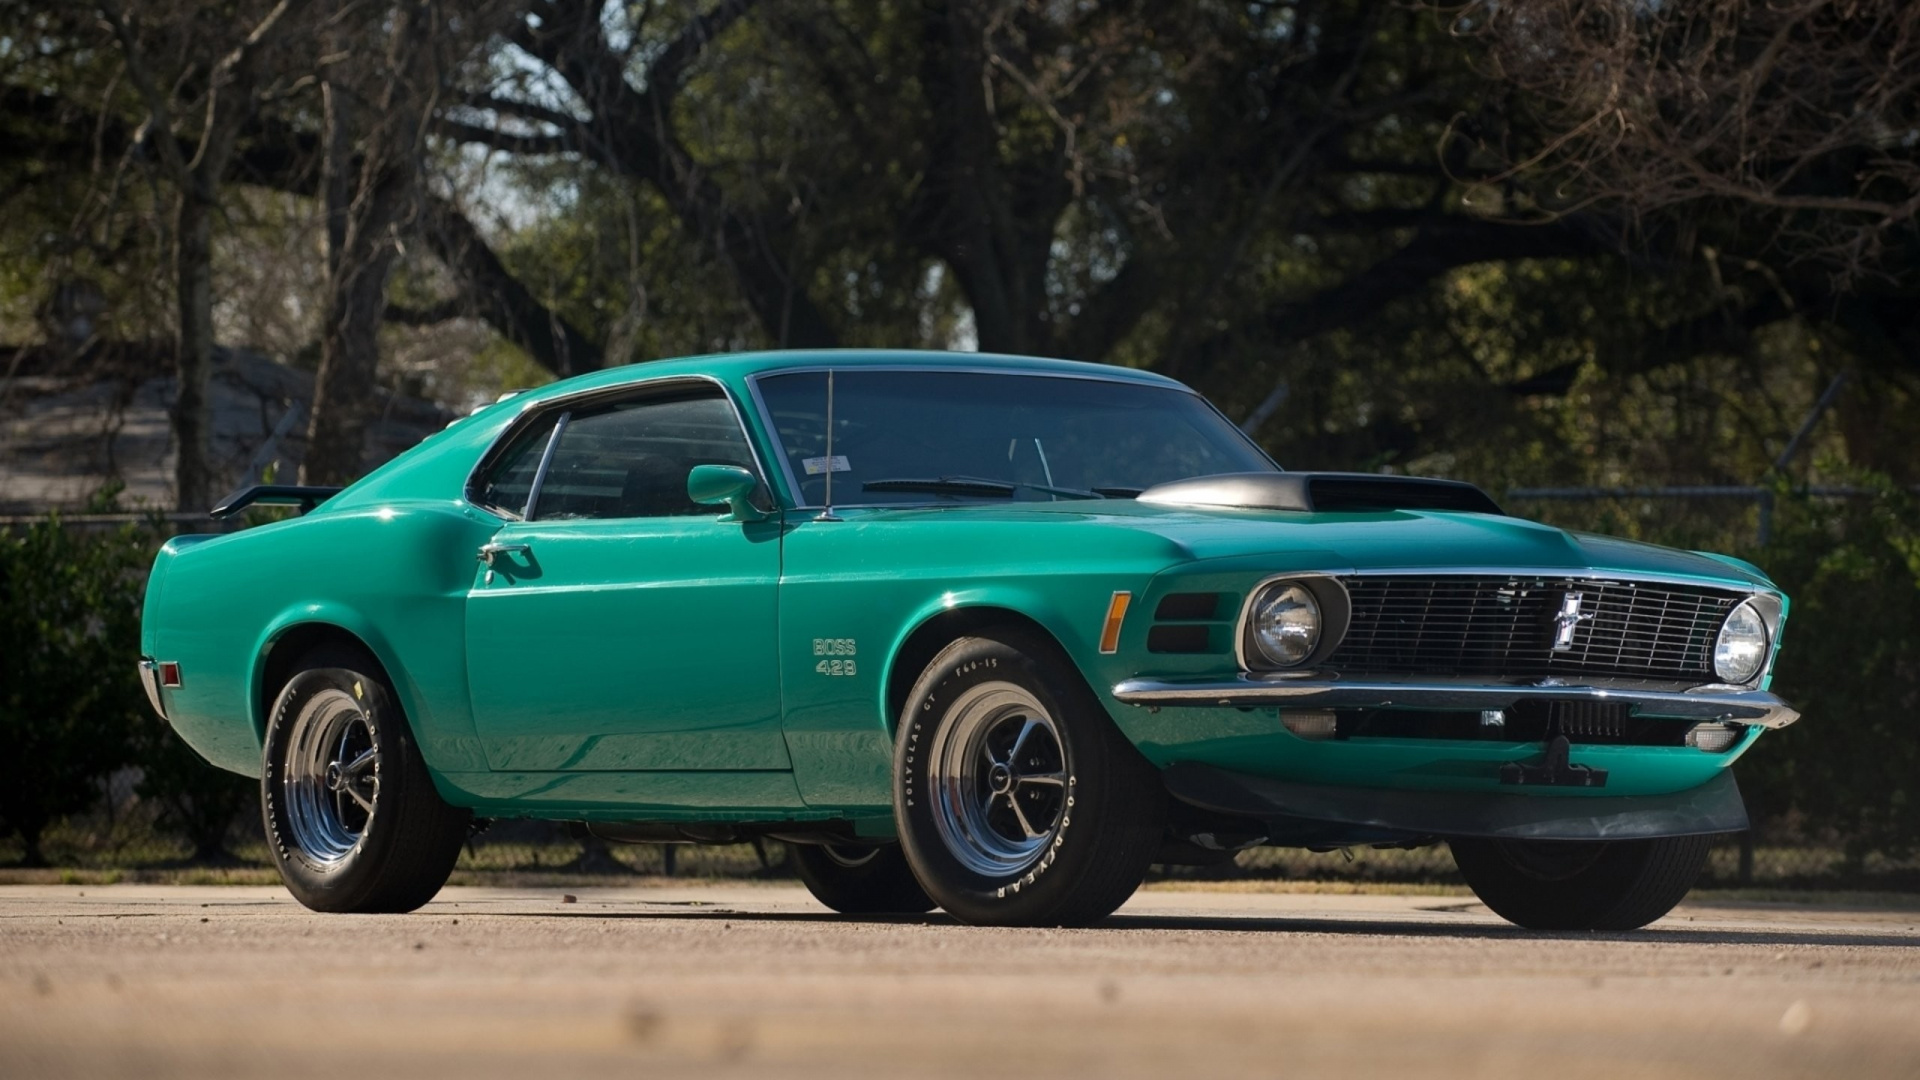 Green Chevrolet Camaro on Road During Daytime. Wallpaper in 1920x1080 Resolution